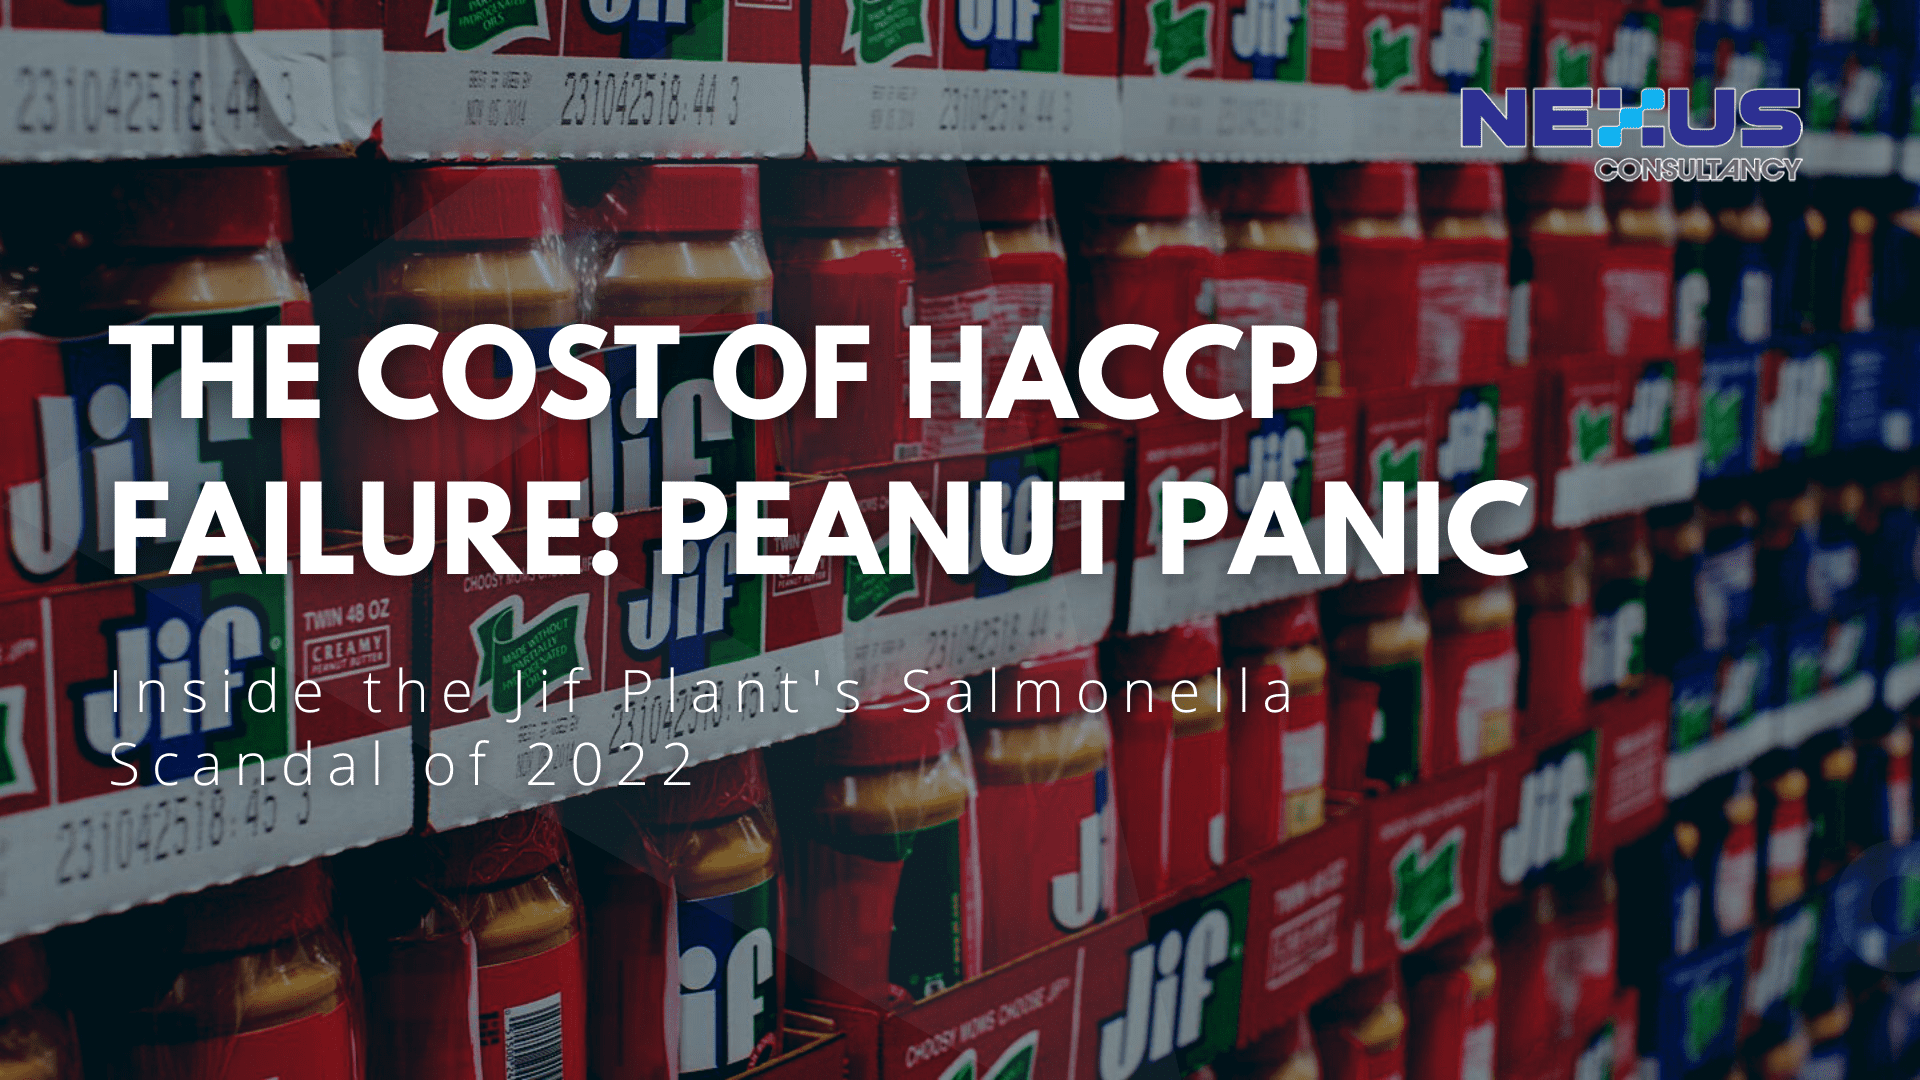 The Cost of HACCP Failure: "Peanut Panic: Inside the Jif Plant's Salmonella Scandal of 2022